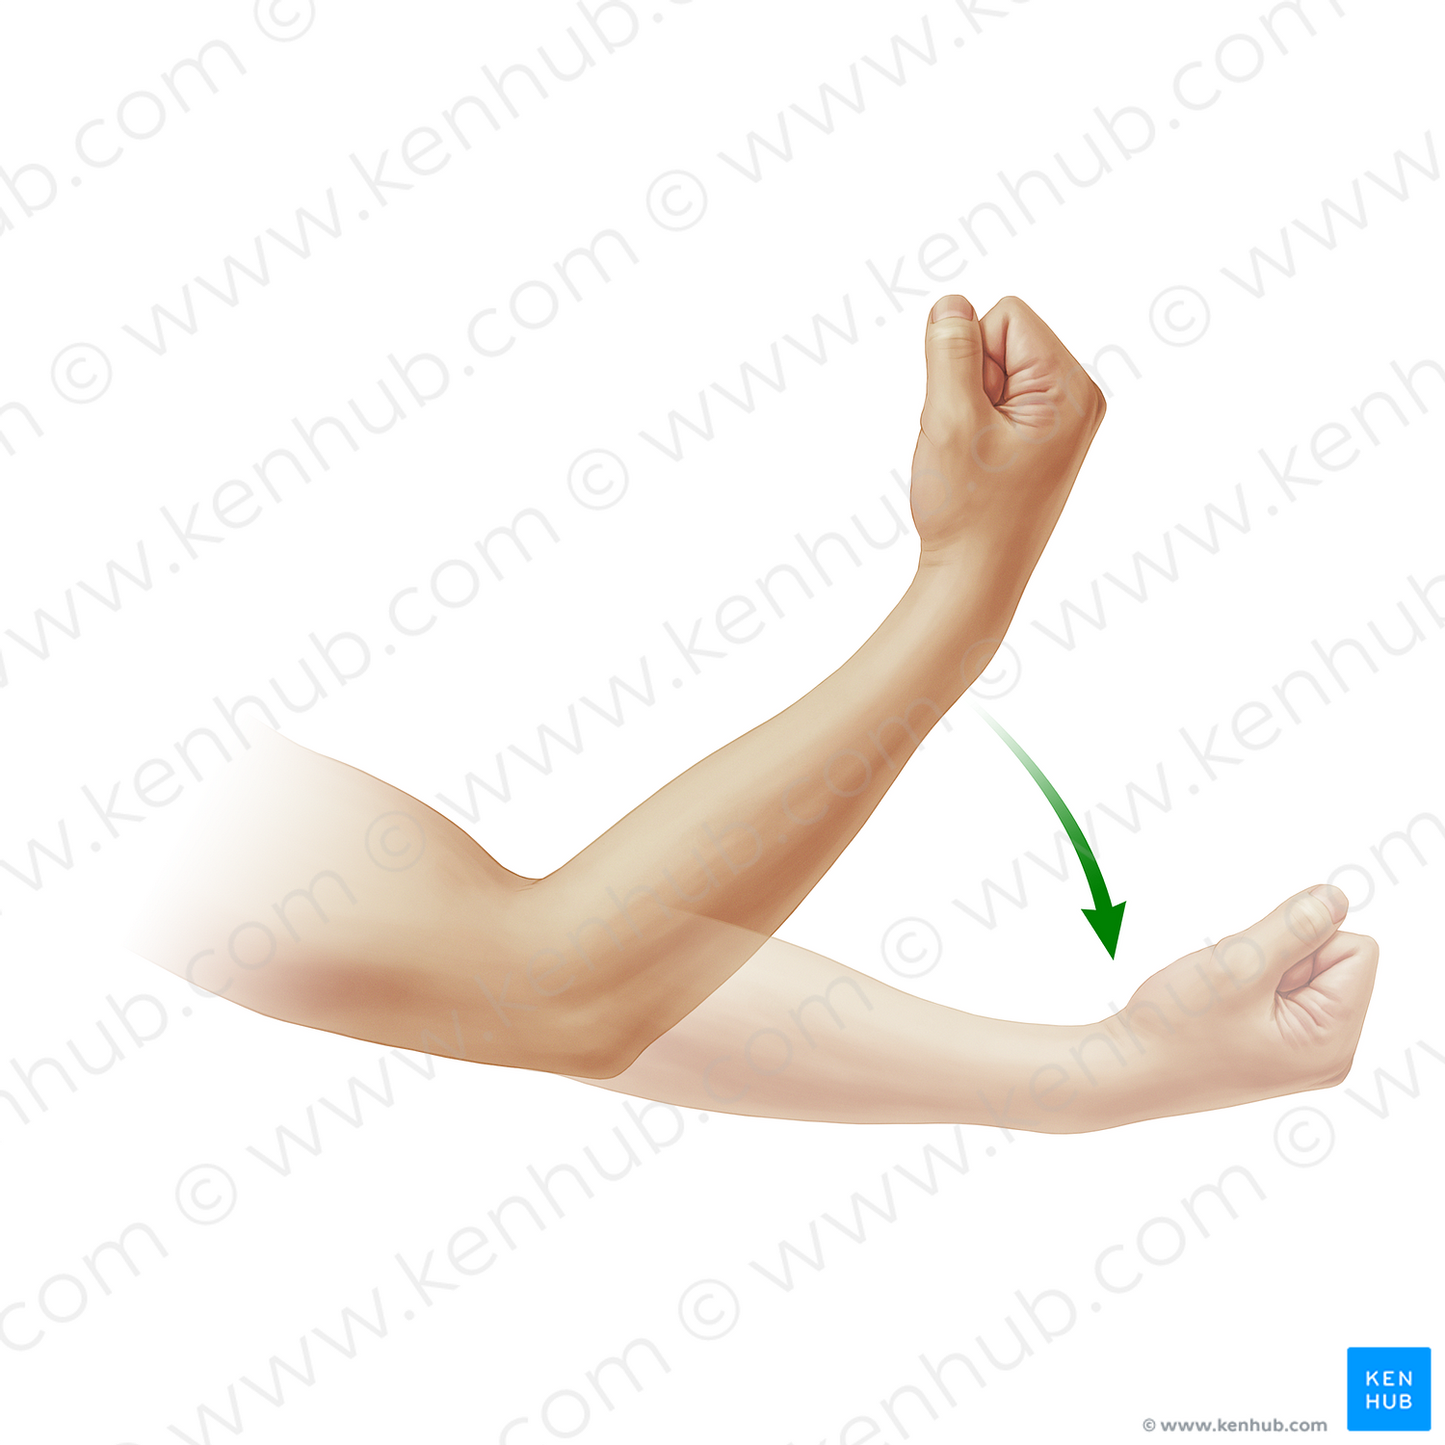 Extension of forearm (#20901)